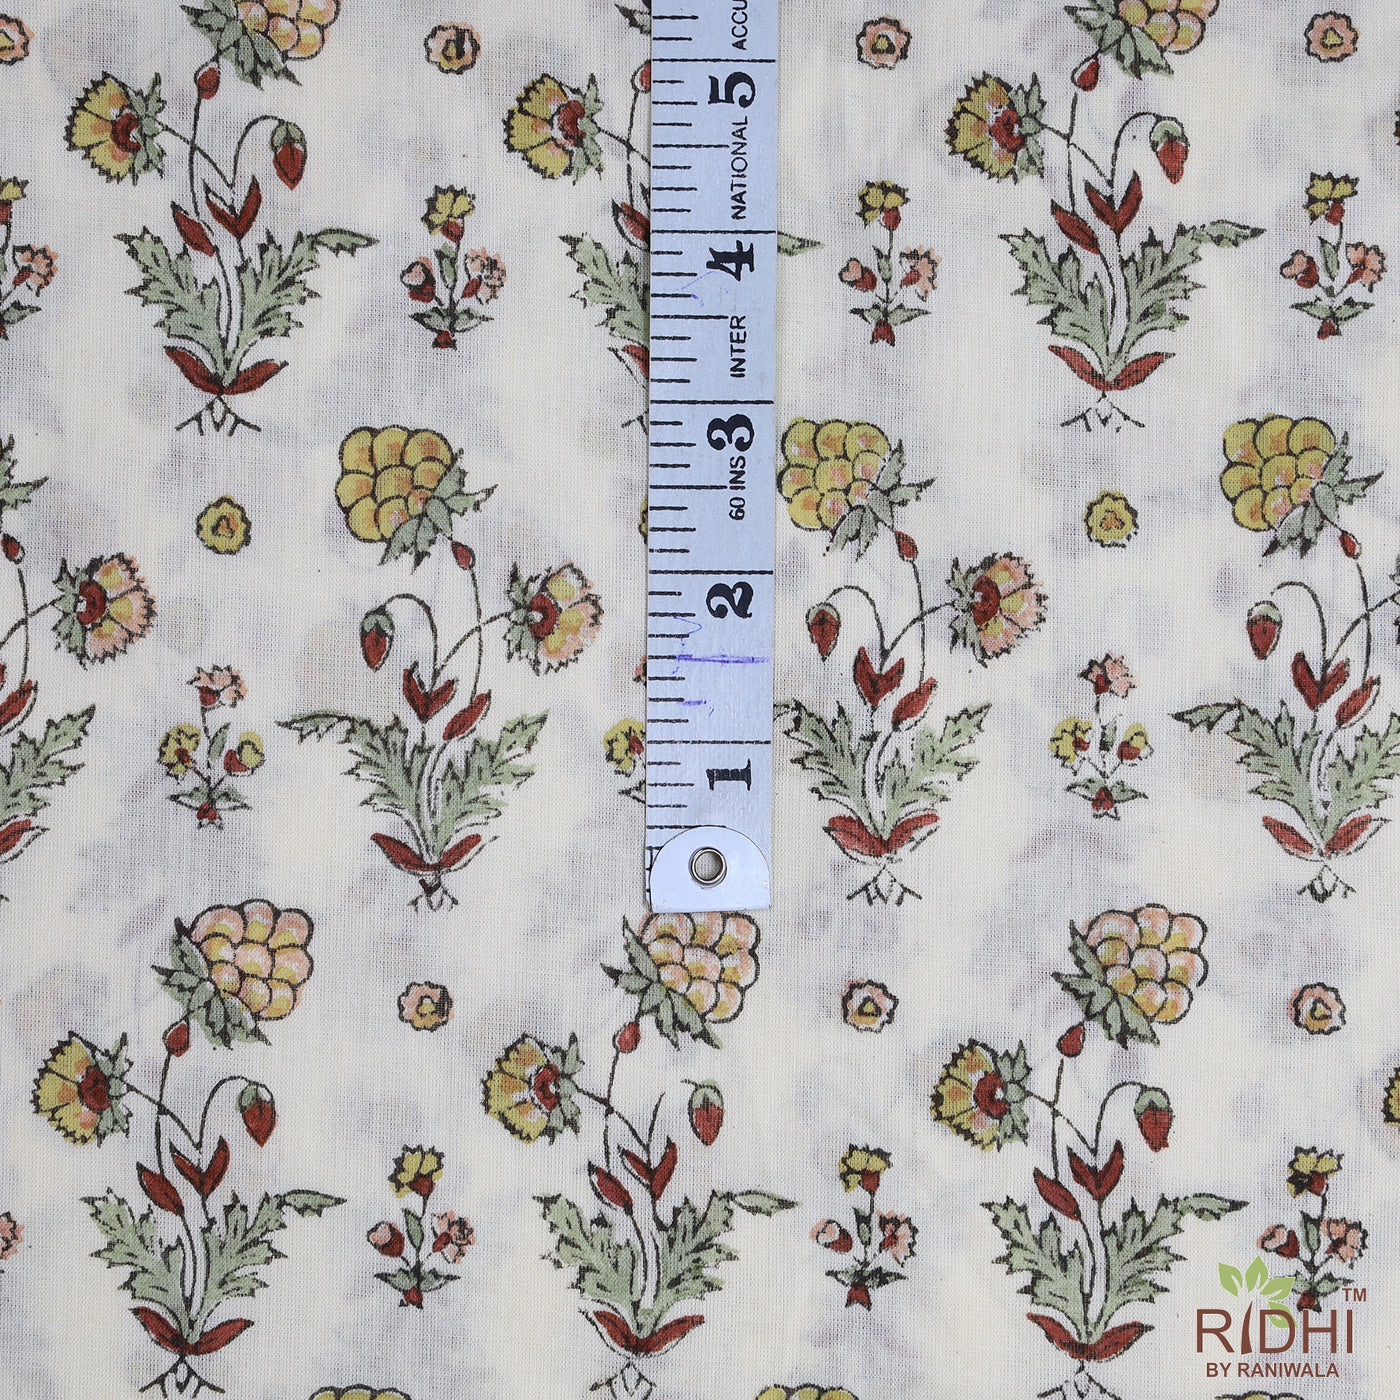 Floral Ivory, Goldenrod, Army Green Indian Floral Hand Block Printed 100% Pure Cotton Cloth, Fabric by the yard, Women's Clothing Curtains